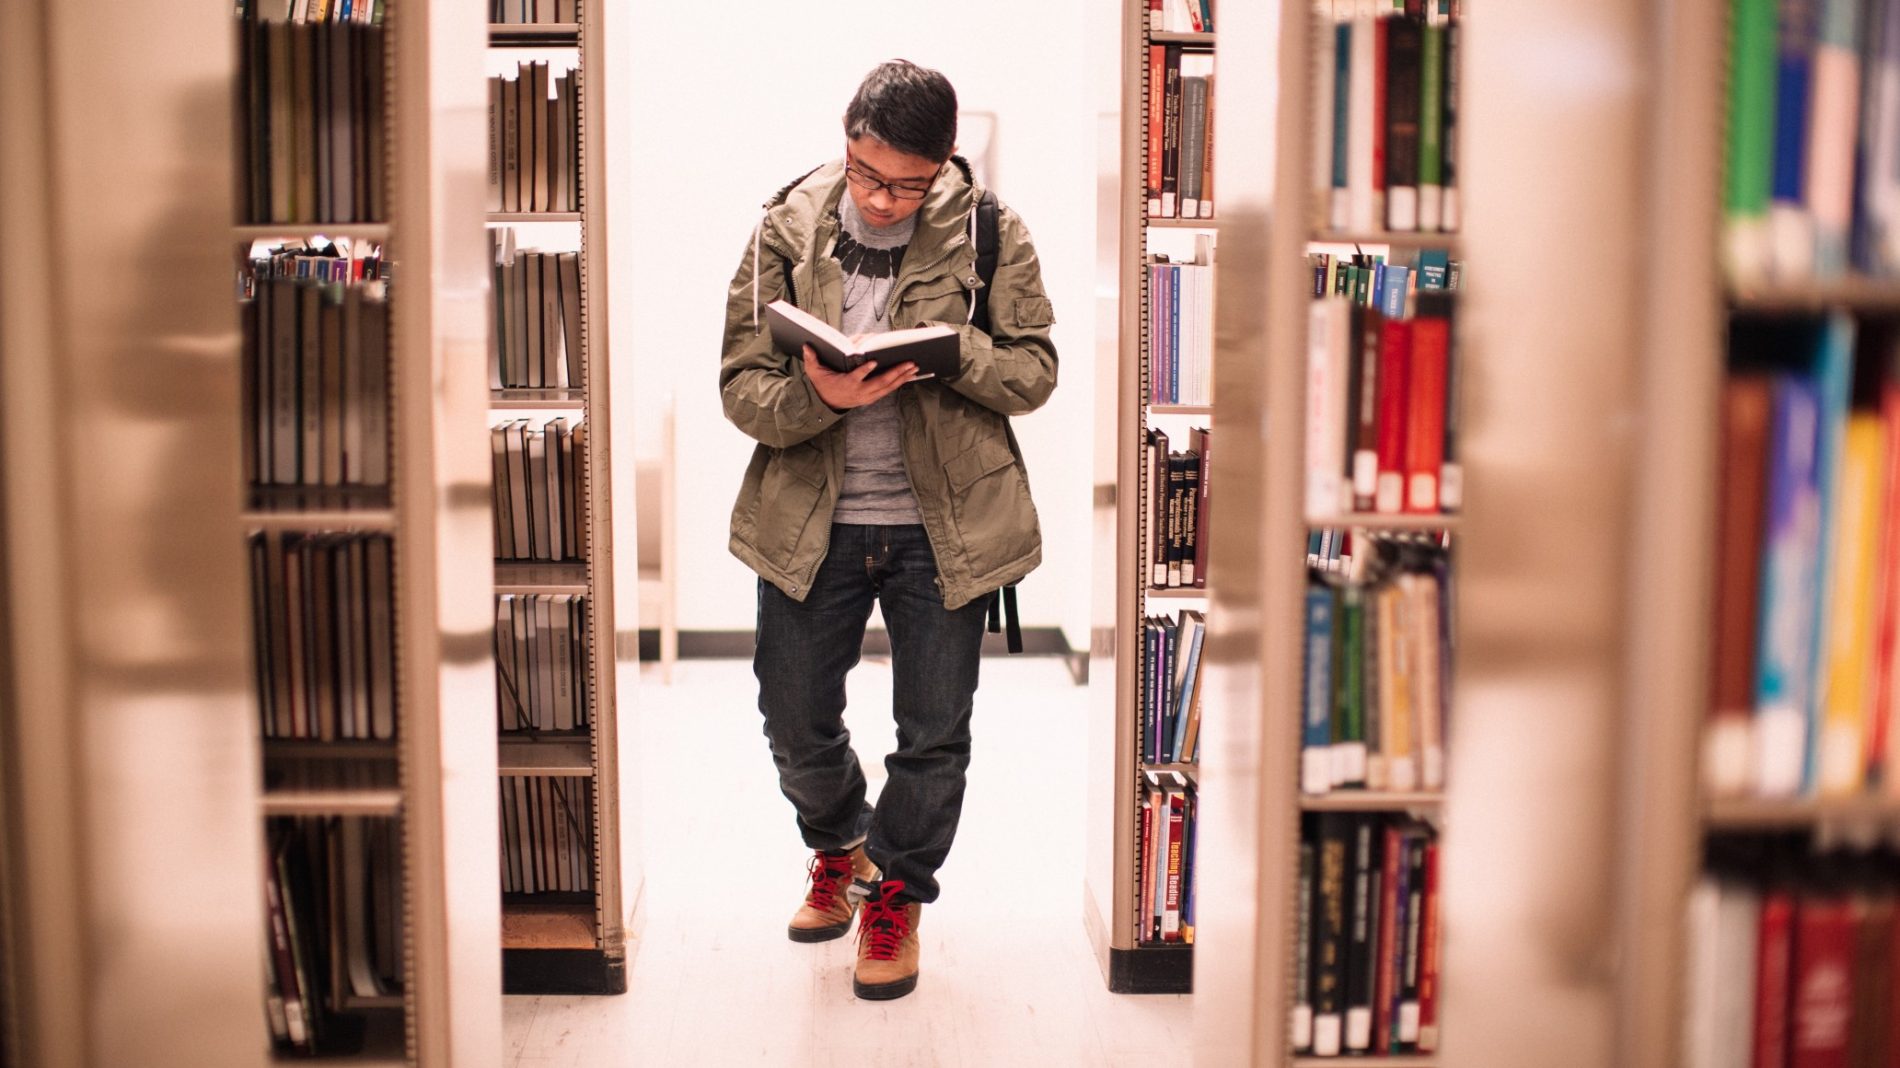 Photo of a person walking through a library while reading a book - student assistance fund